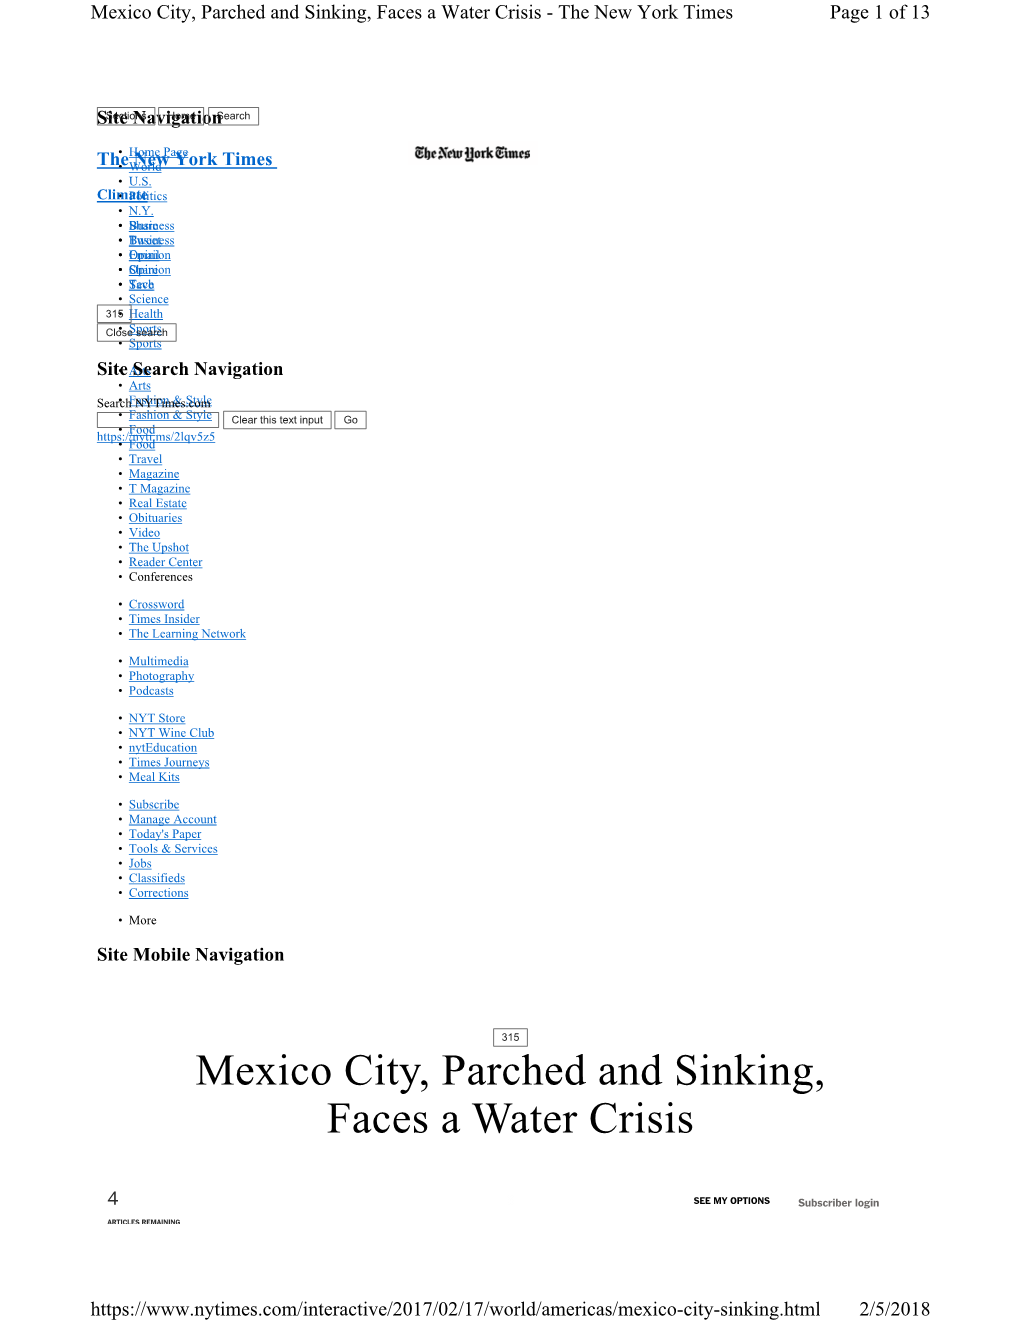 Mexico City, Parched and Sinking, Faces a Water Crisis - the New York Times Page 1 of 13